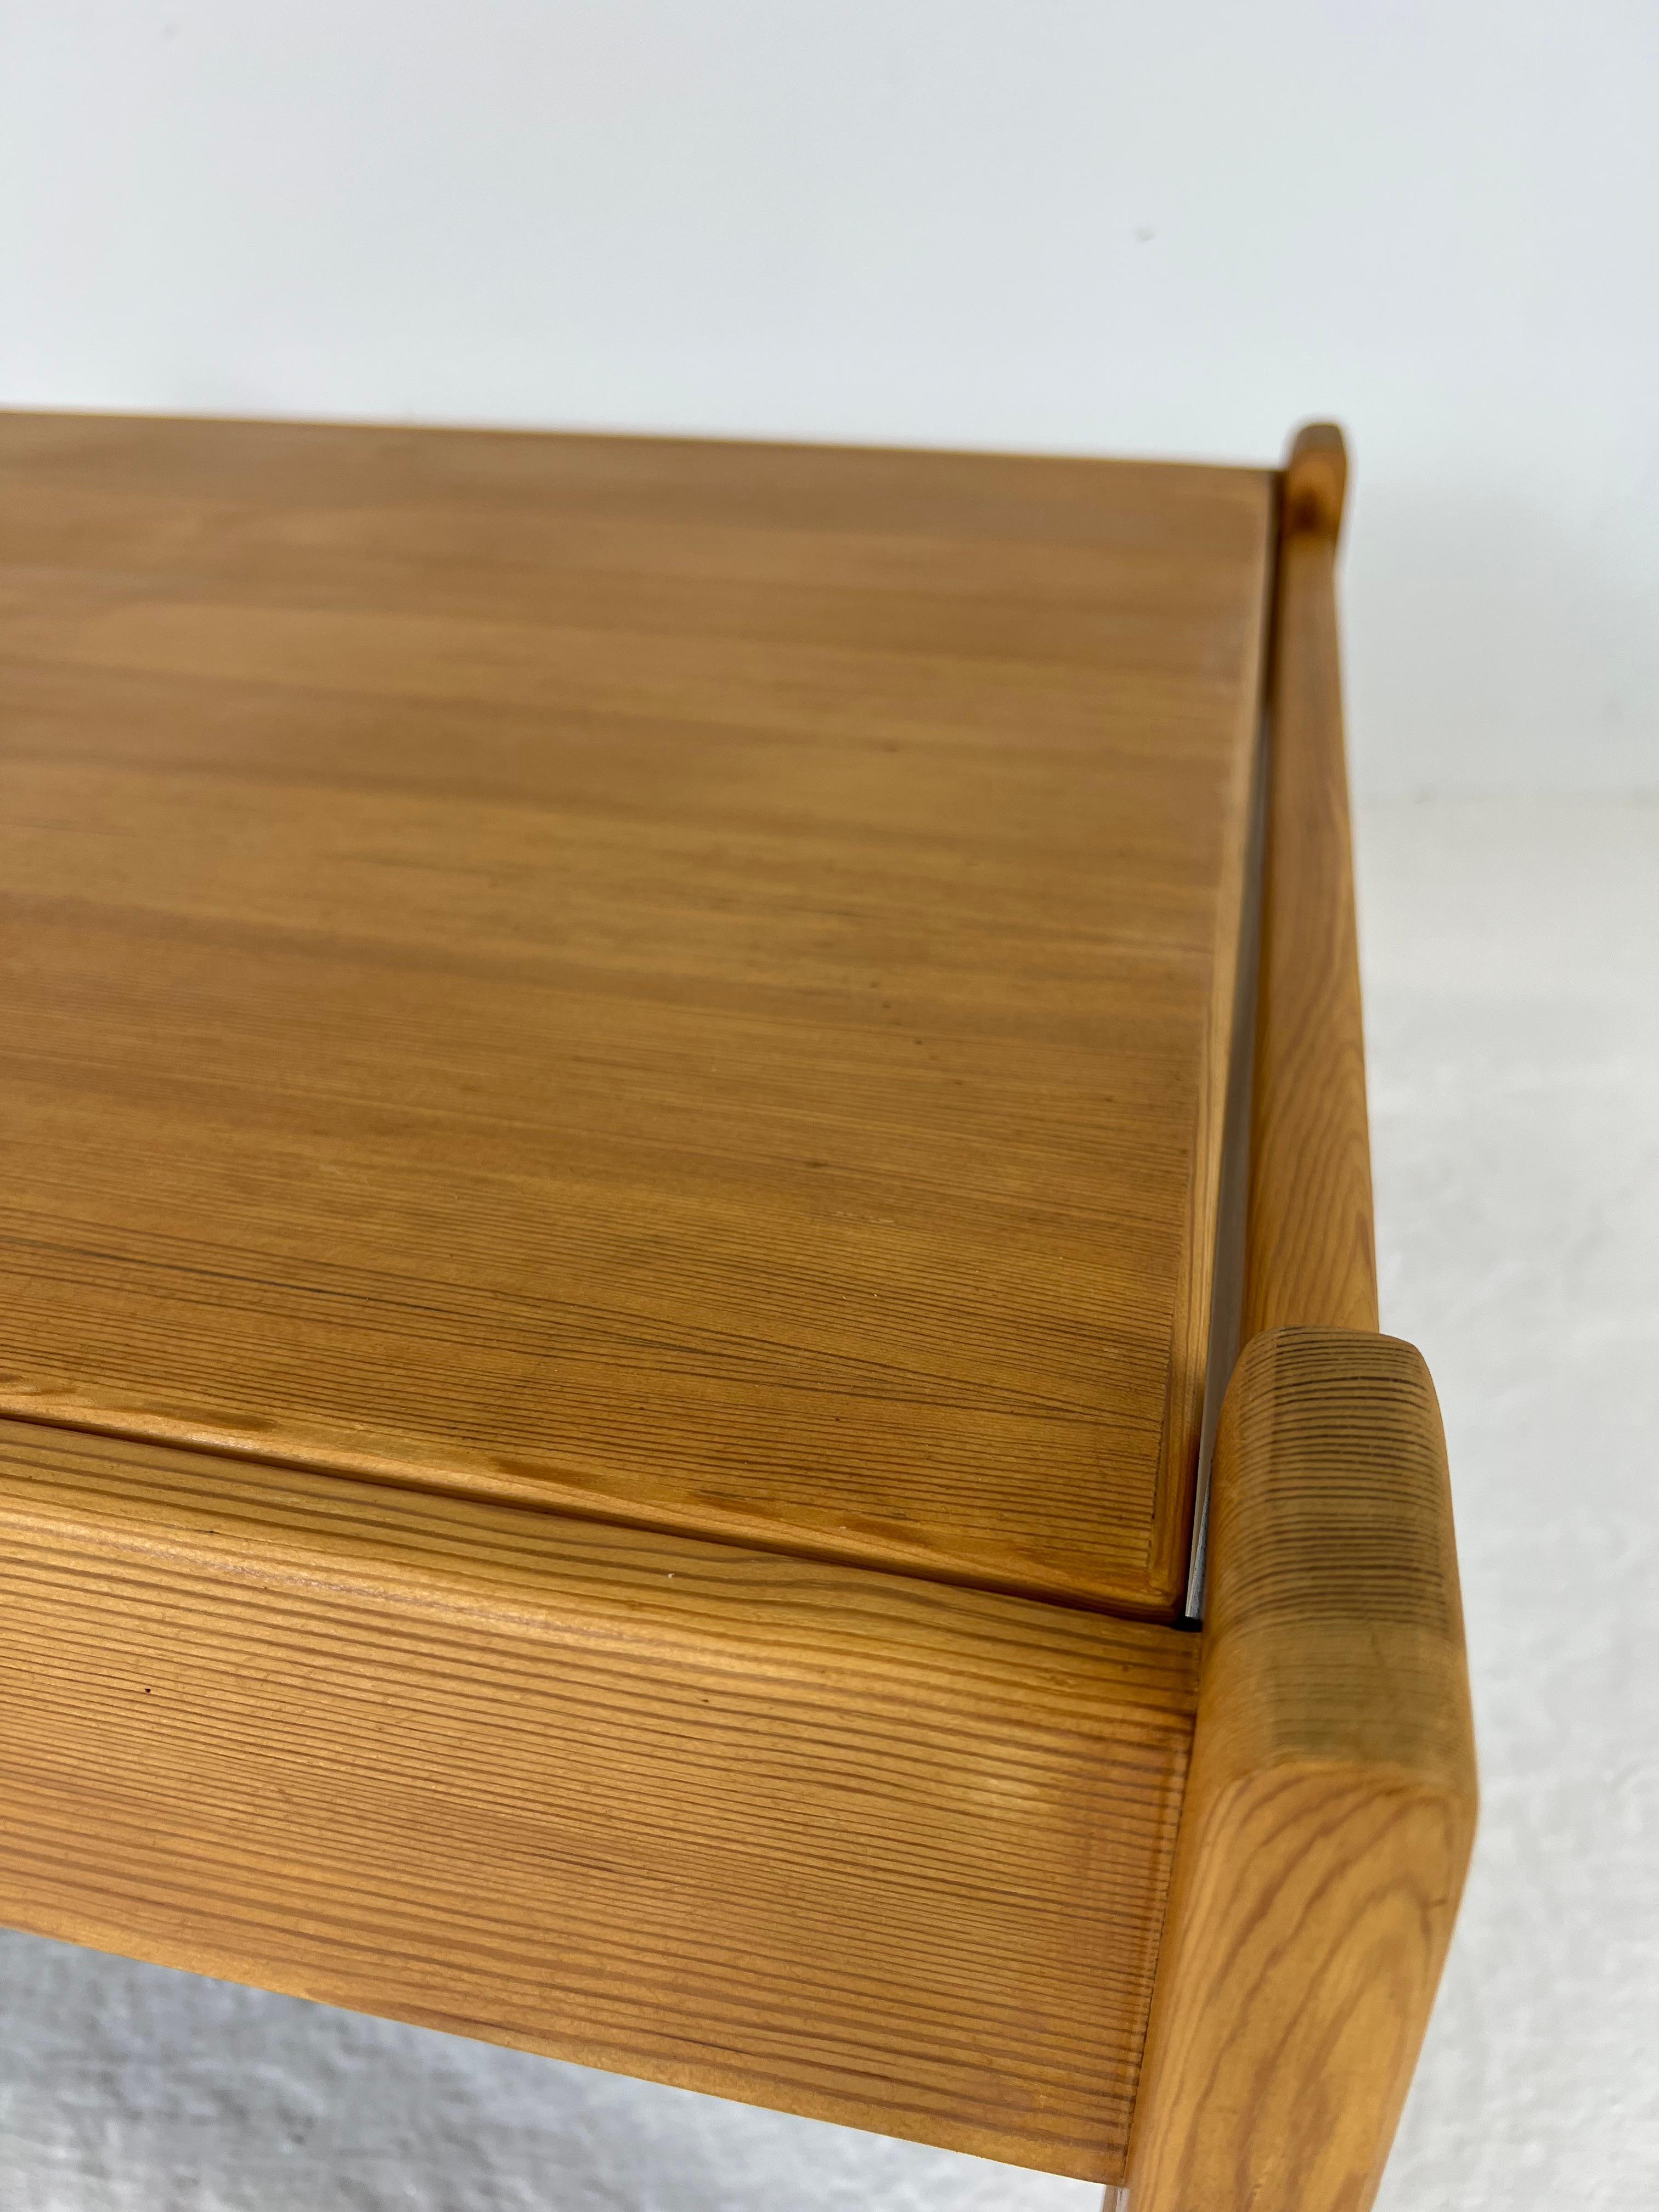 Two-Sided Modernist Coffee Table in Pine Wood, 1970s For Sale 11